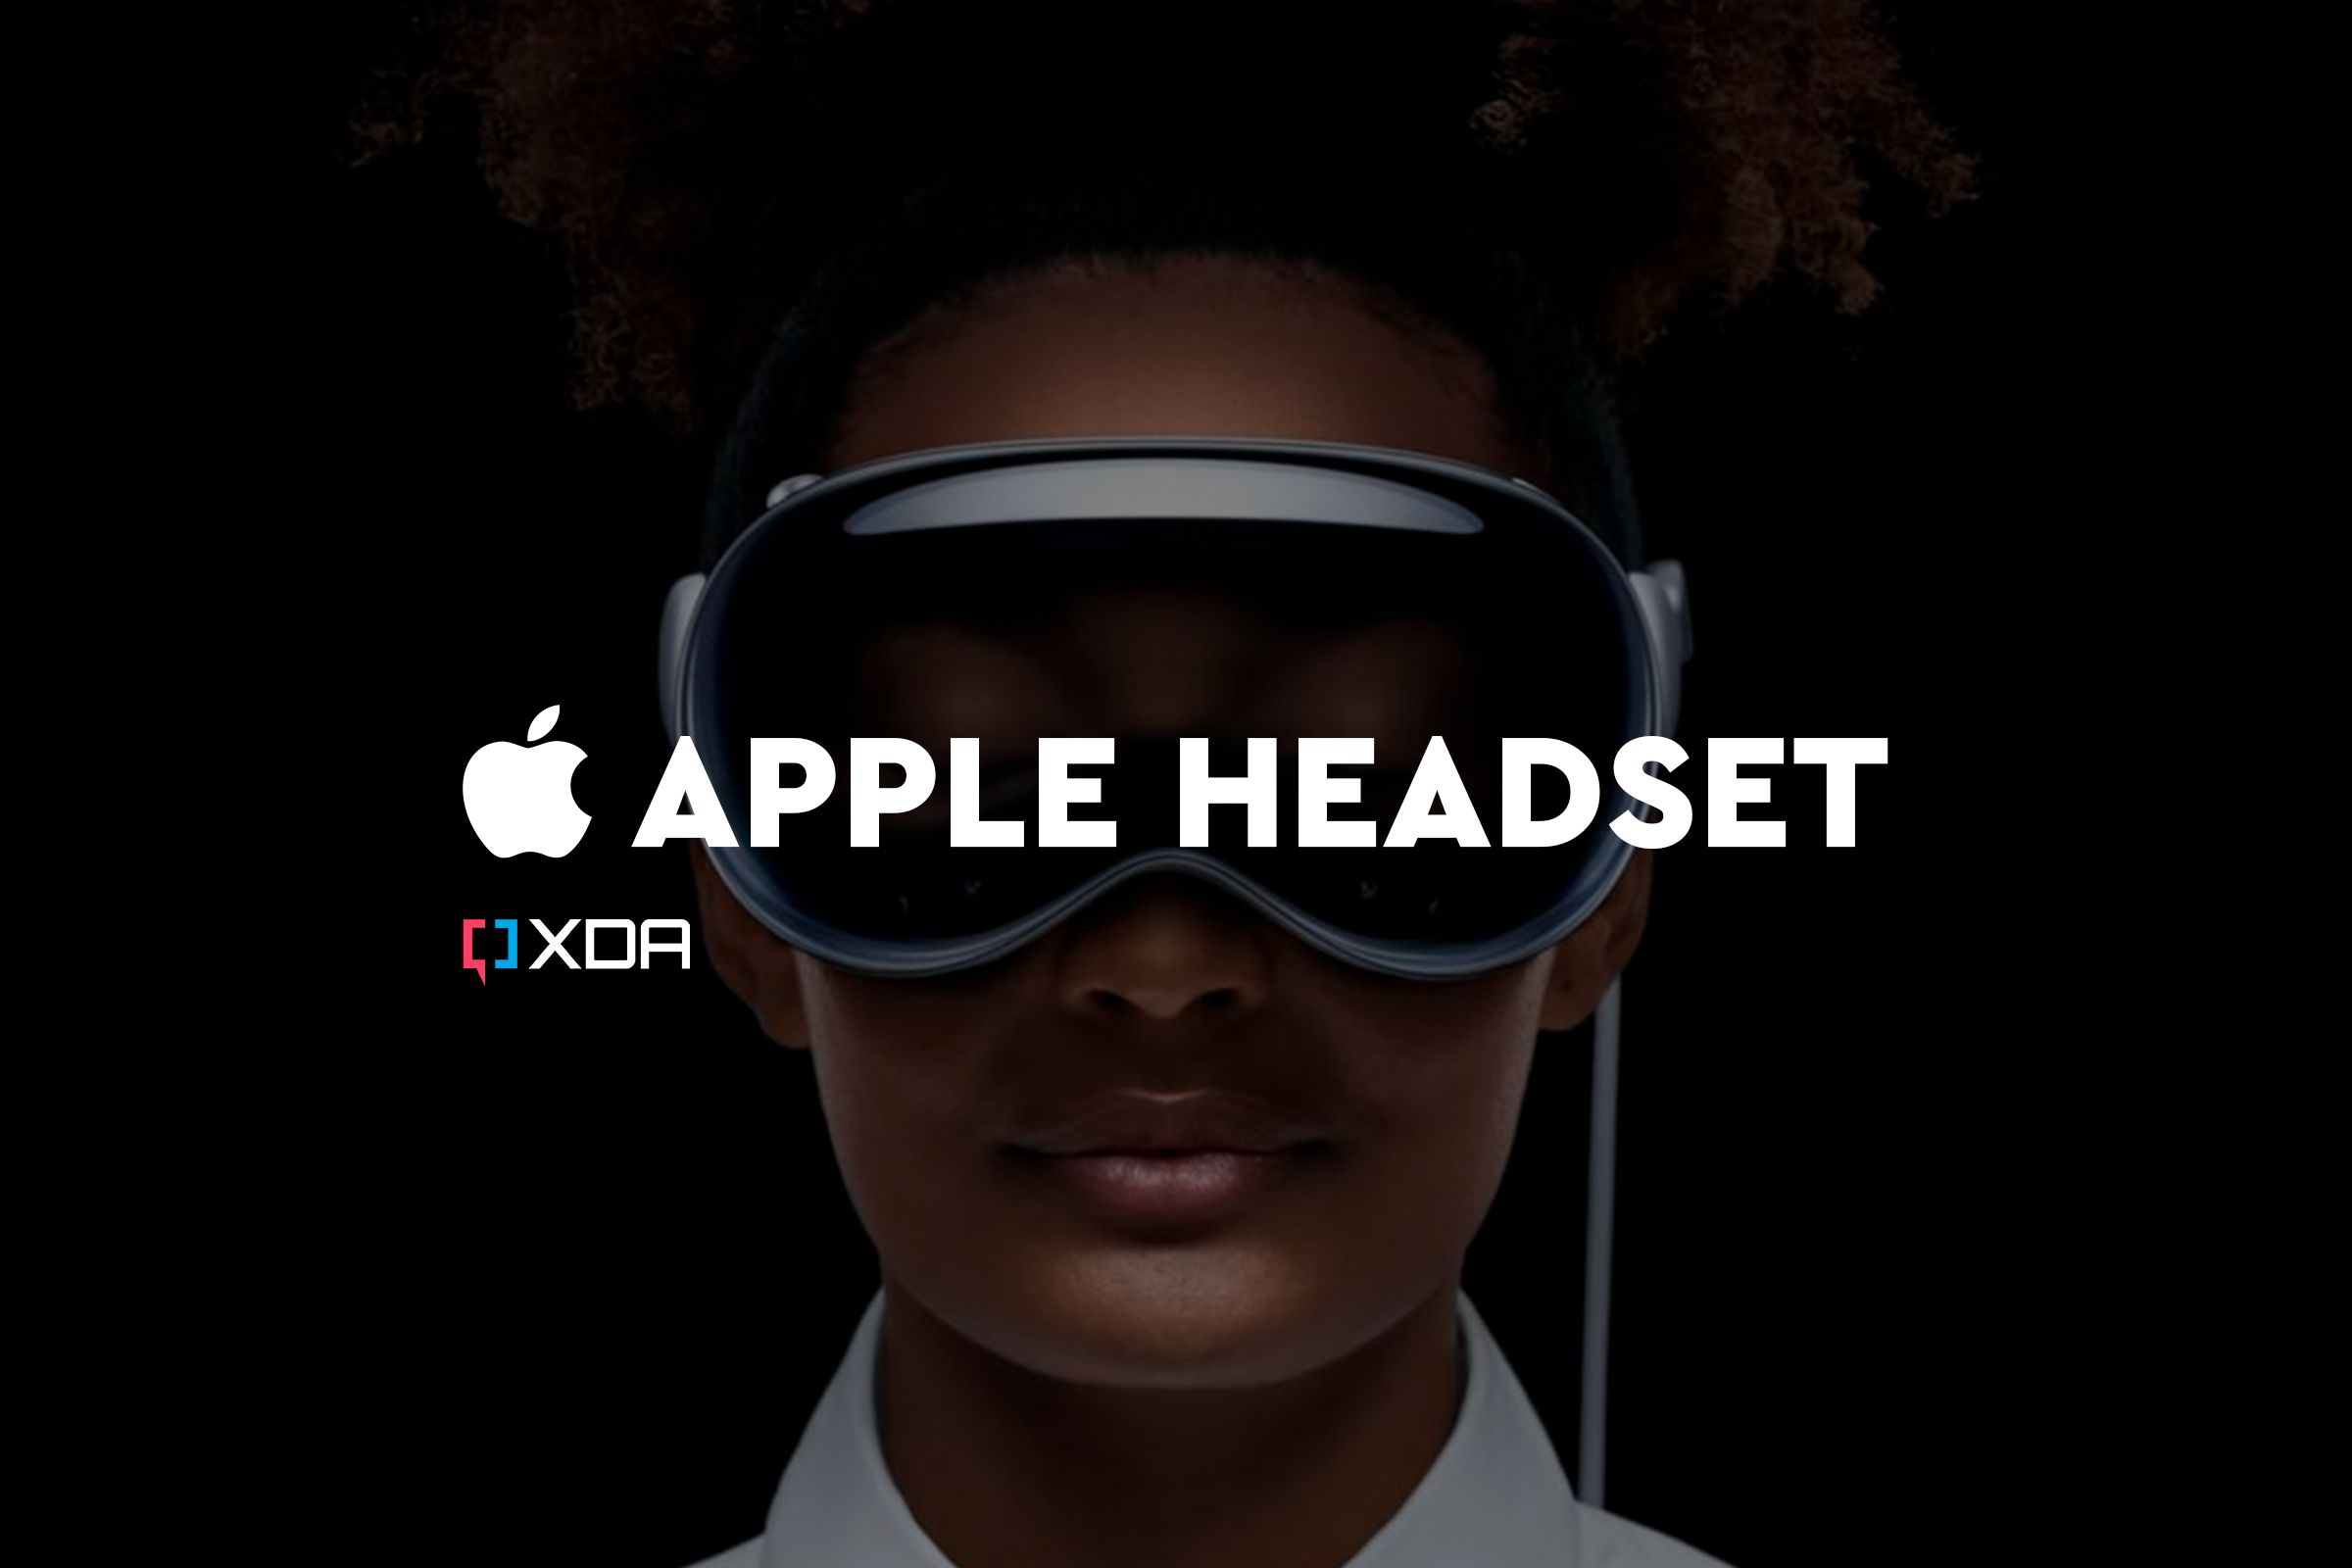 Apple Vision Pro headset: Price, specifications, and everything you need to know